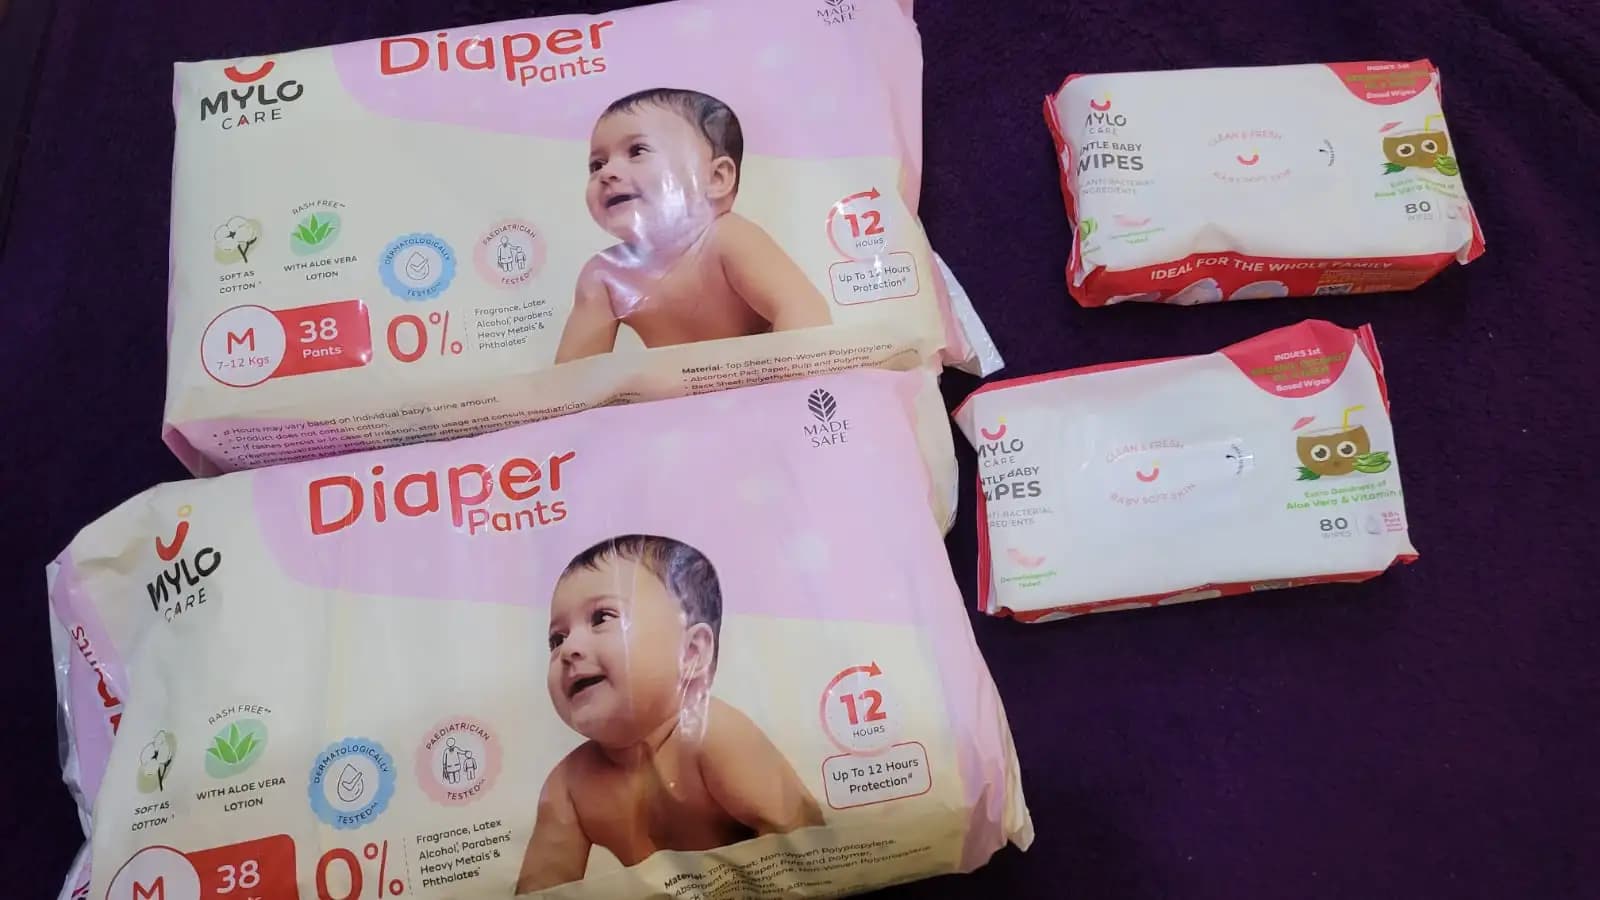 Super Saver Combo - Baby Diaper Pants Small (S) Size 4-8 kgs (84 count) Leak Proof + Baby Powder for Kids - 300 gm